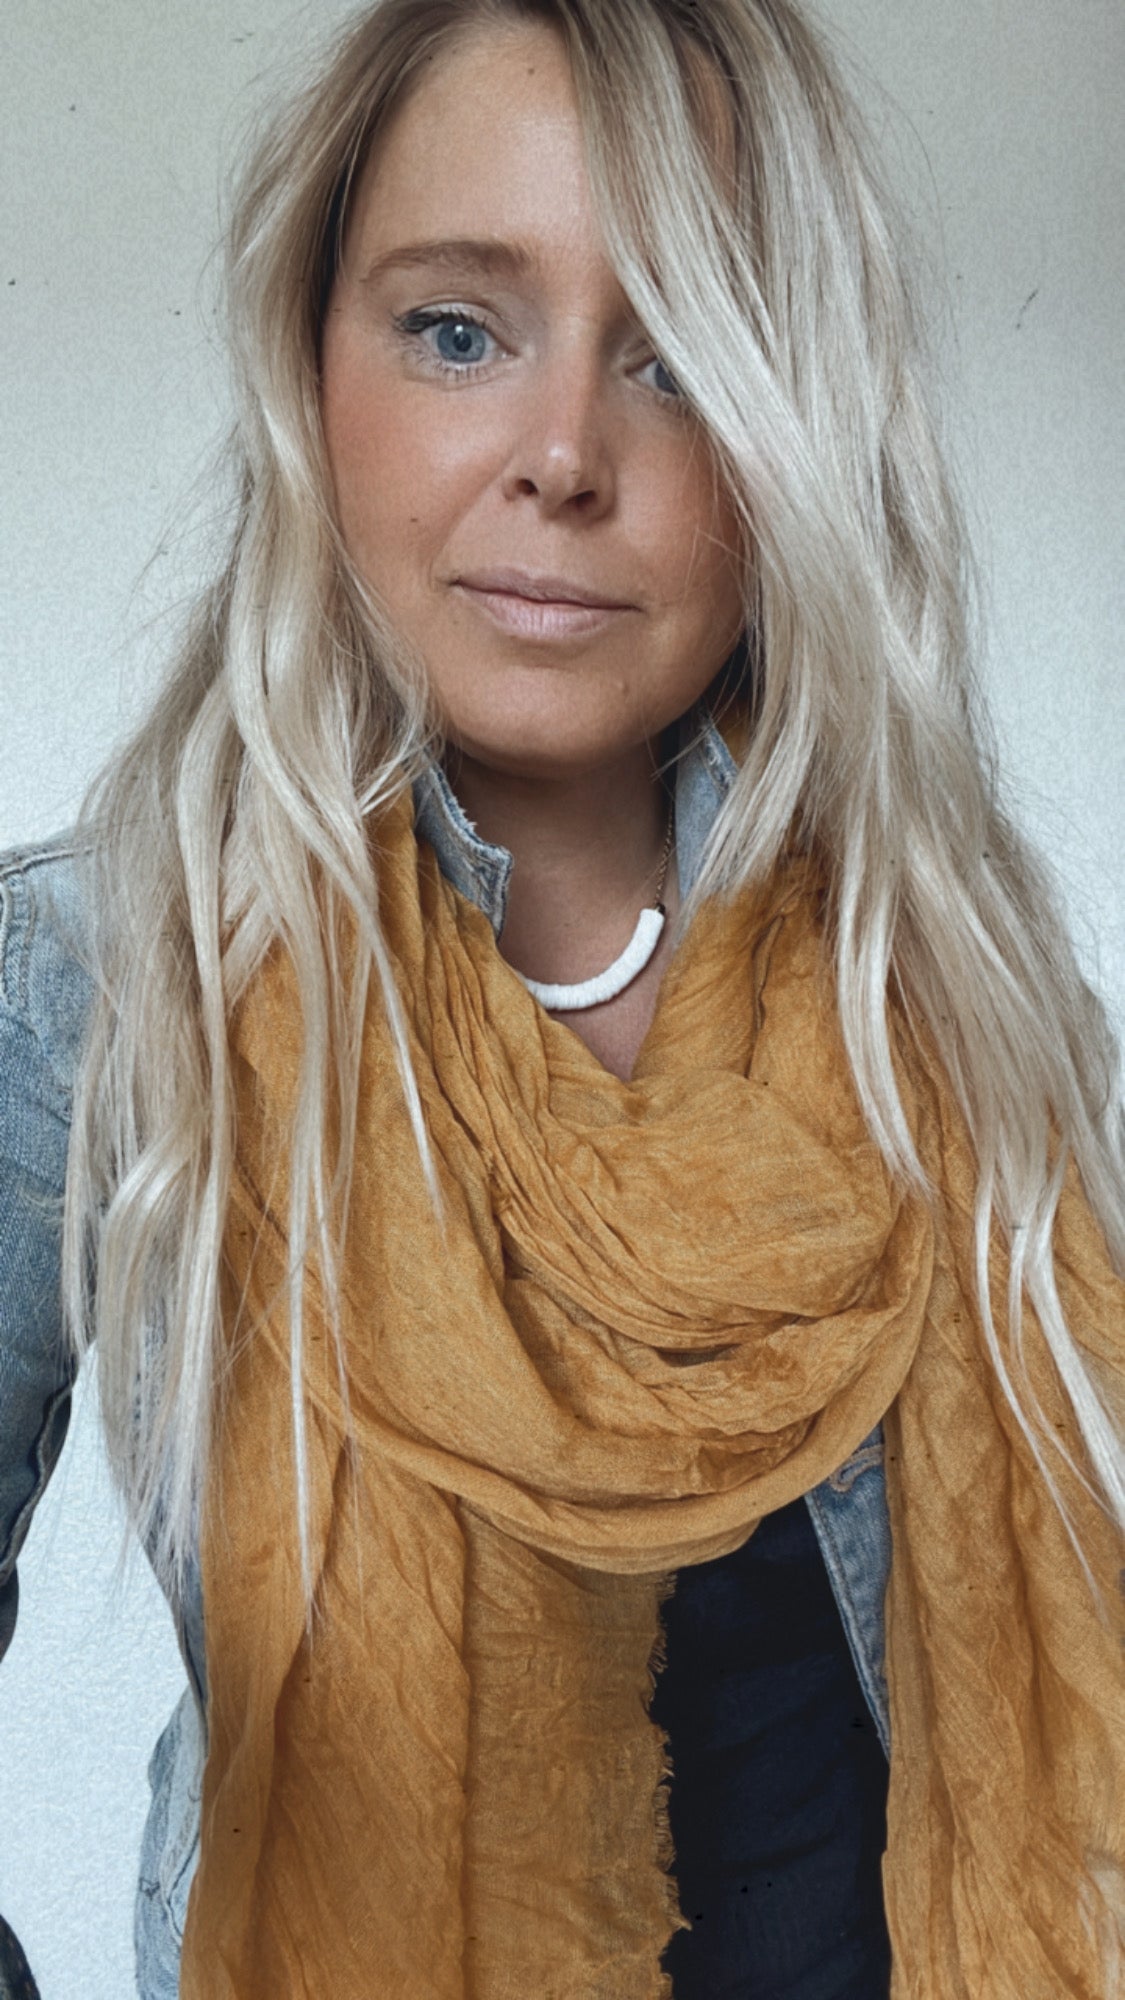 Traveler's Scarf (Available in 5 colors)